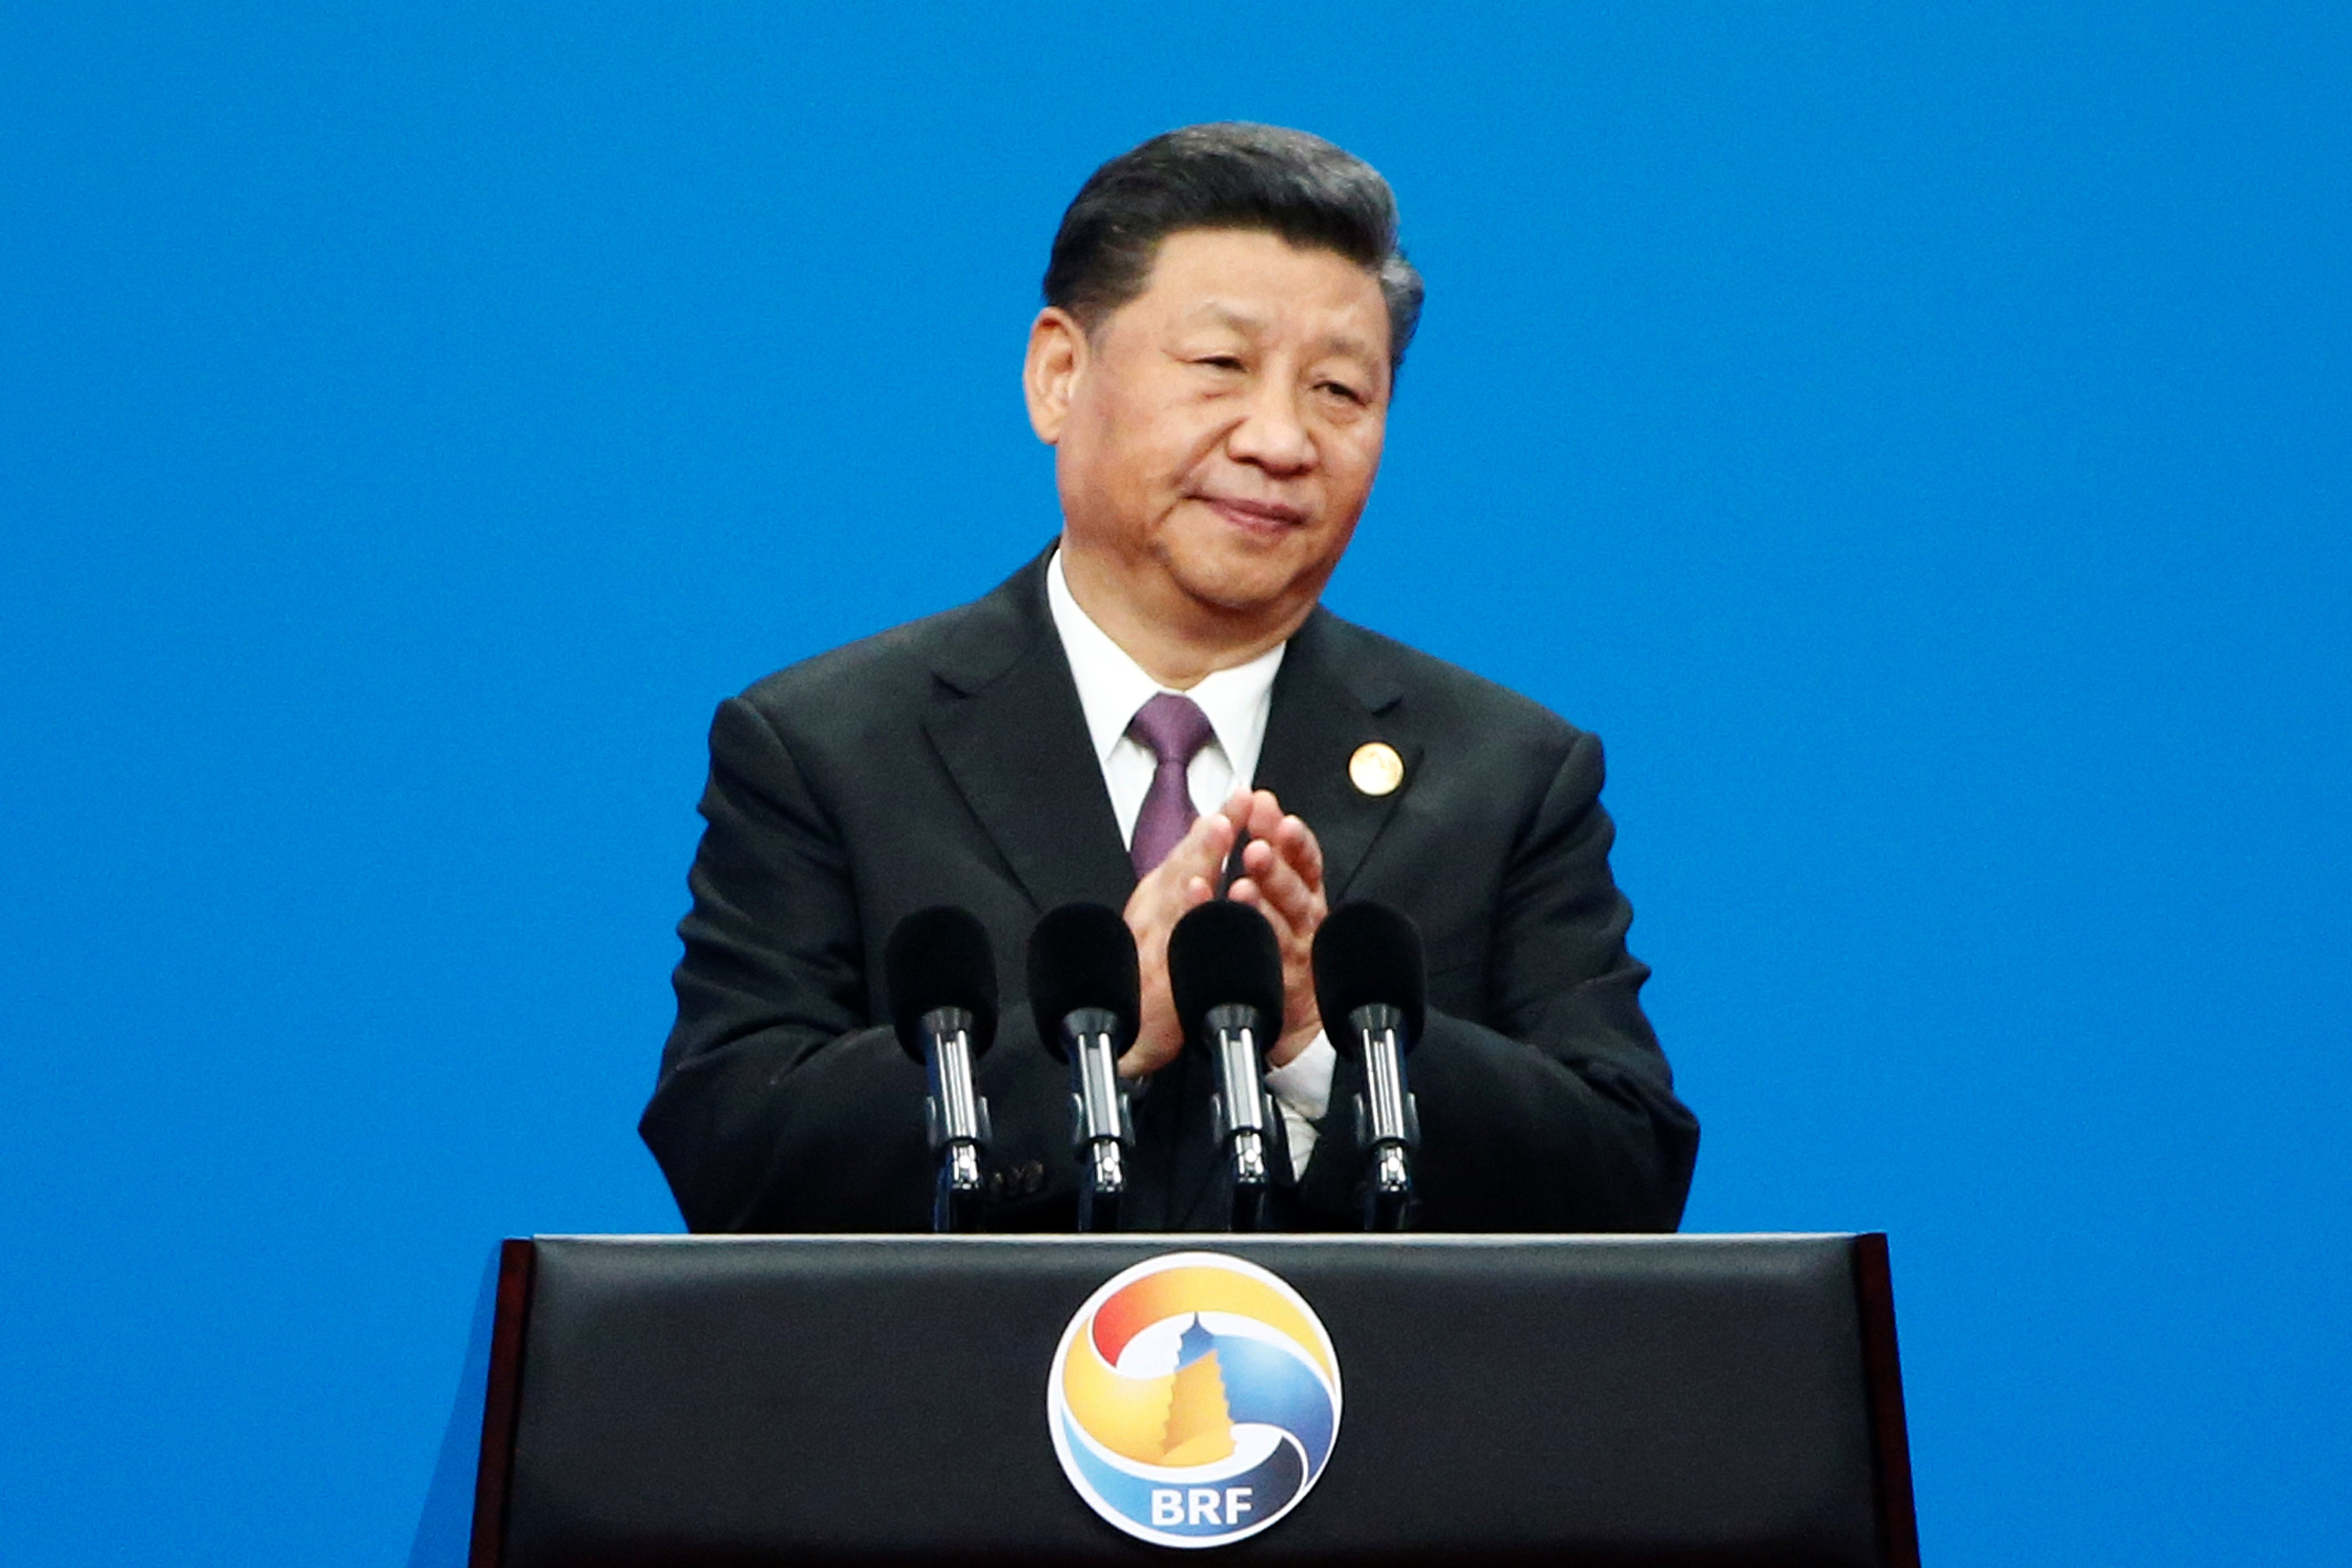 Xi Jinping sought to allay doubts about the Belt and Road Initiative. Photo: Reuters